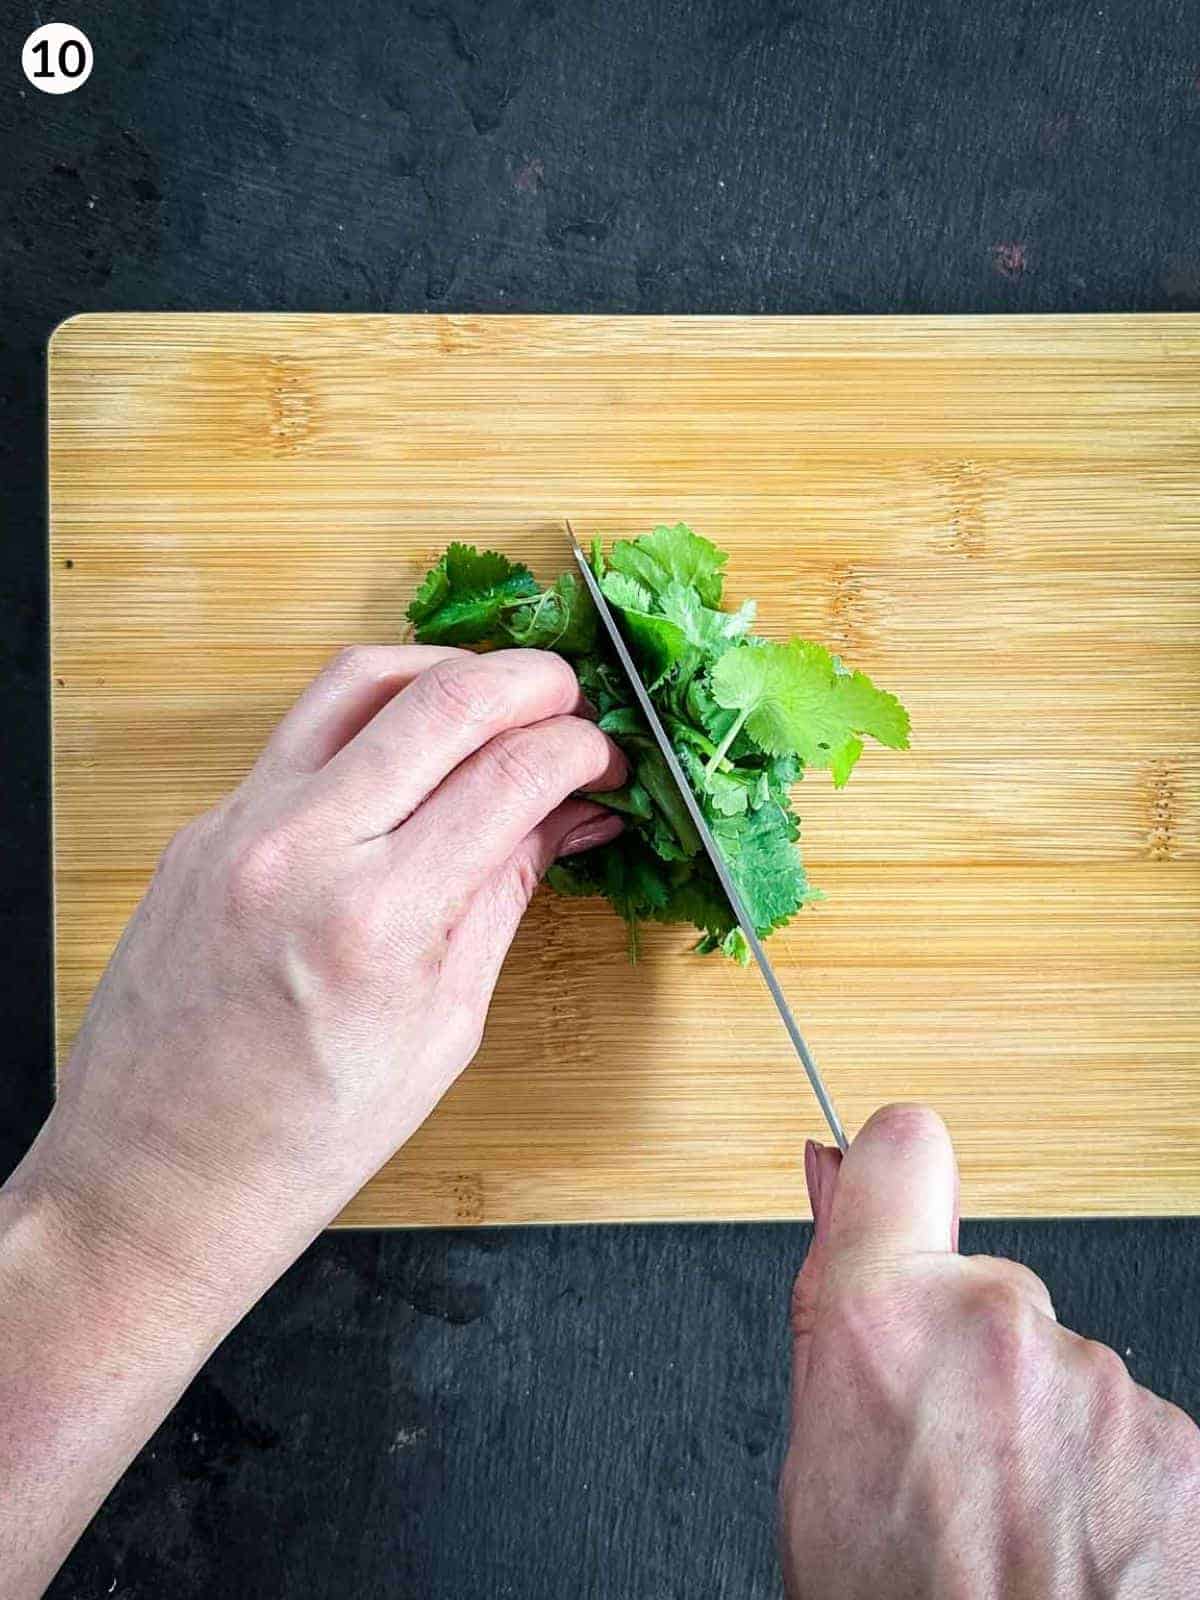 Chopping cilantro with a knife on a wooden board